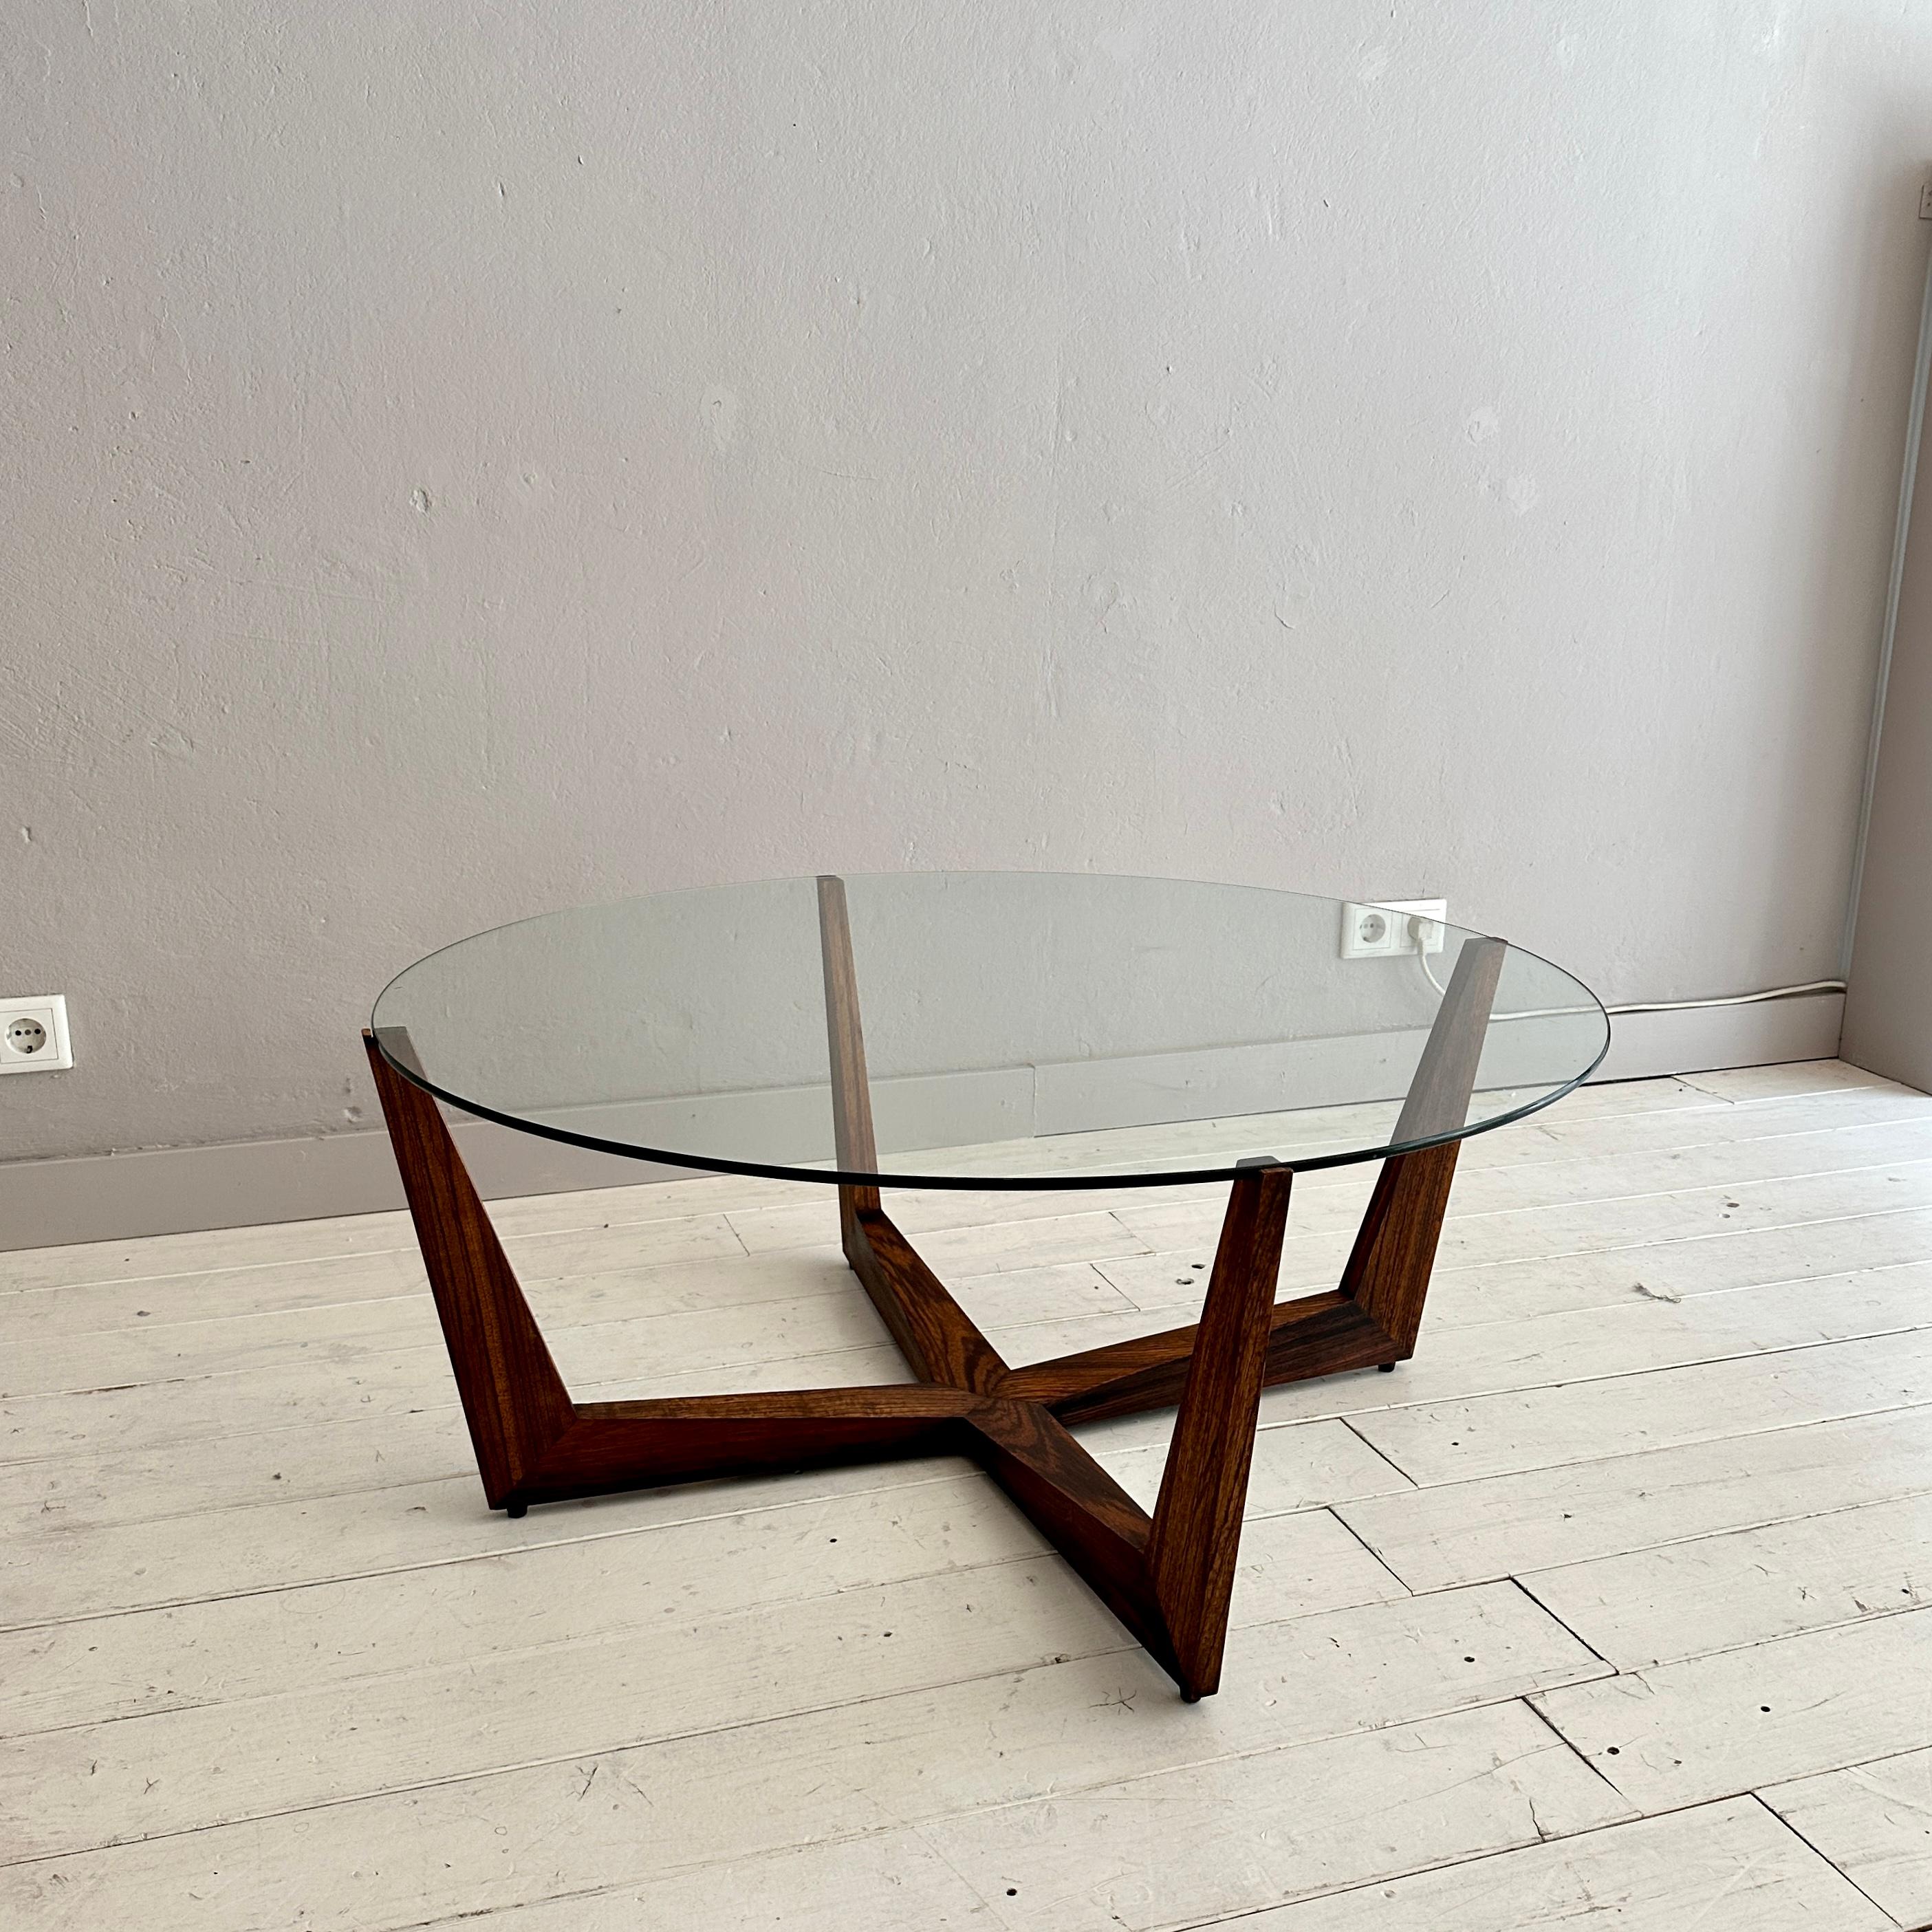 Mid-Century Modern Round Coffee Table by Wilhelm Renz in Teak and Glass, around 1960 For Sale